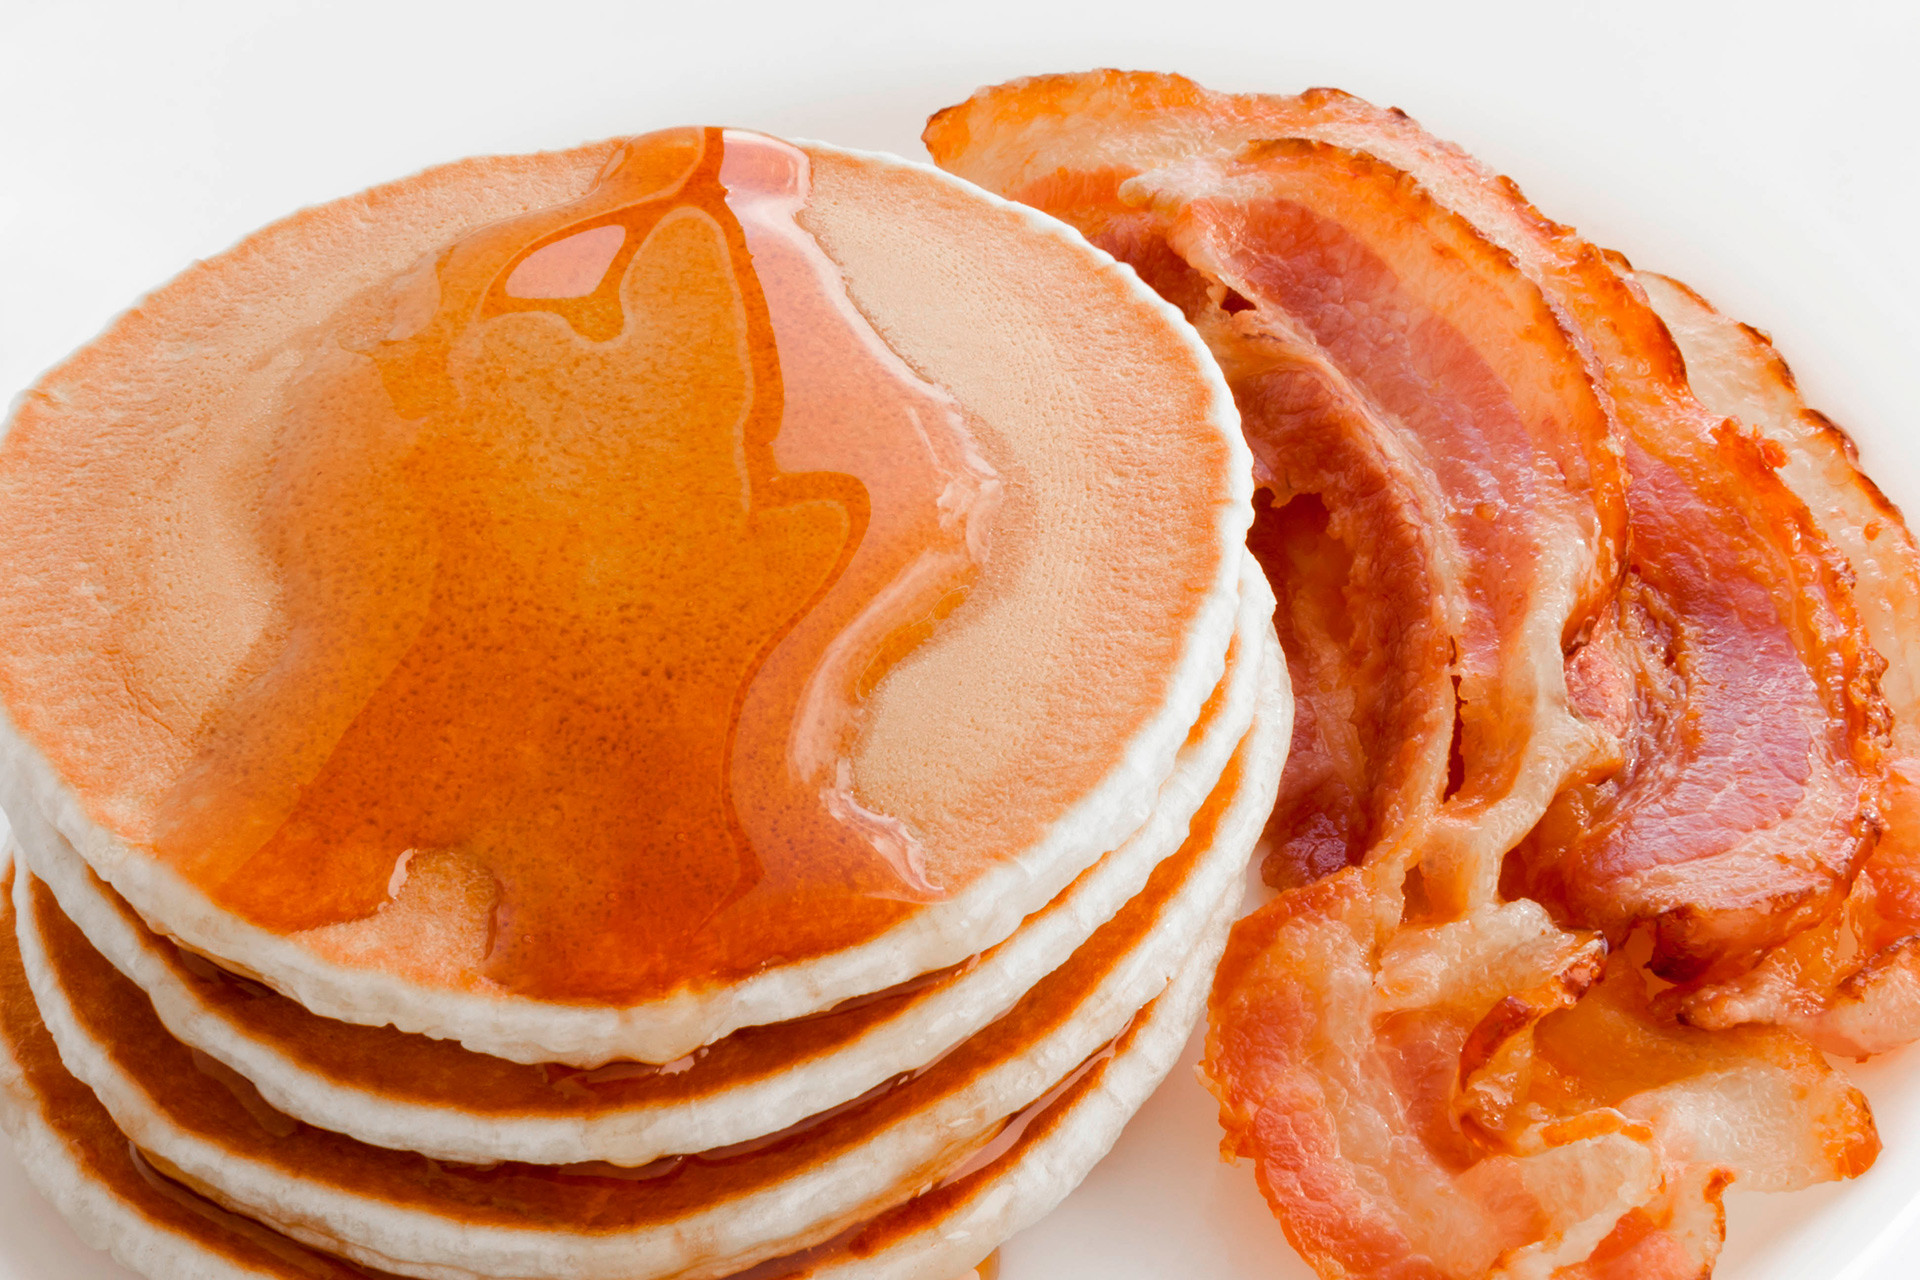 Pancakes with maple syrup and bacon.